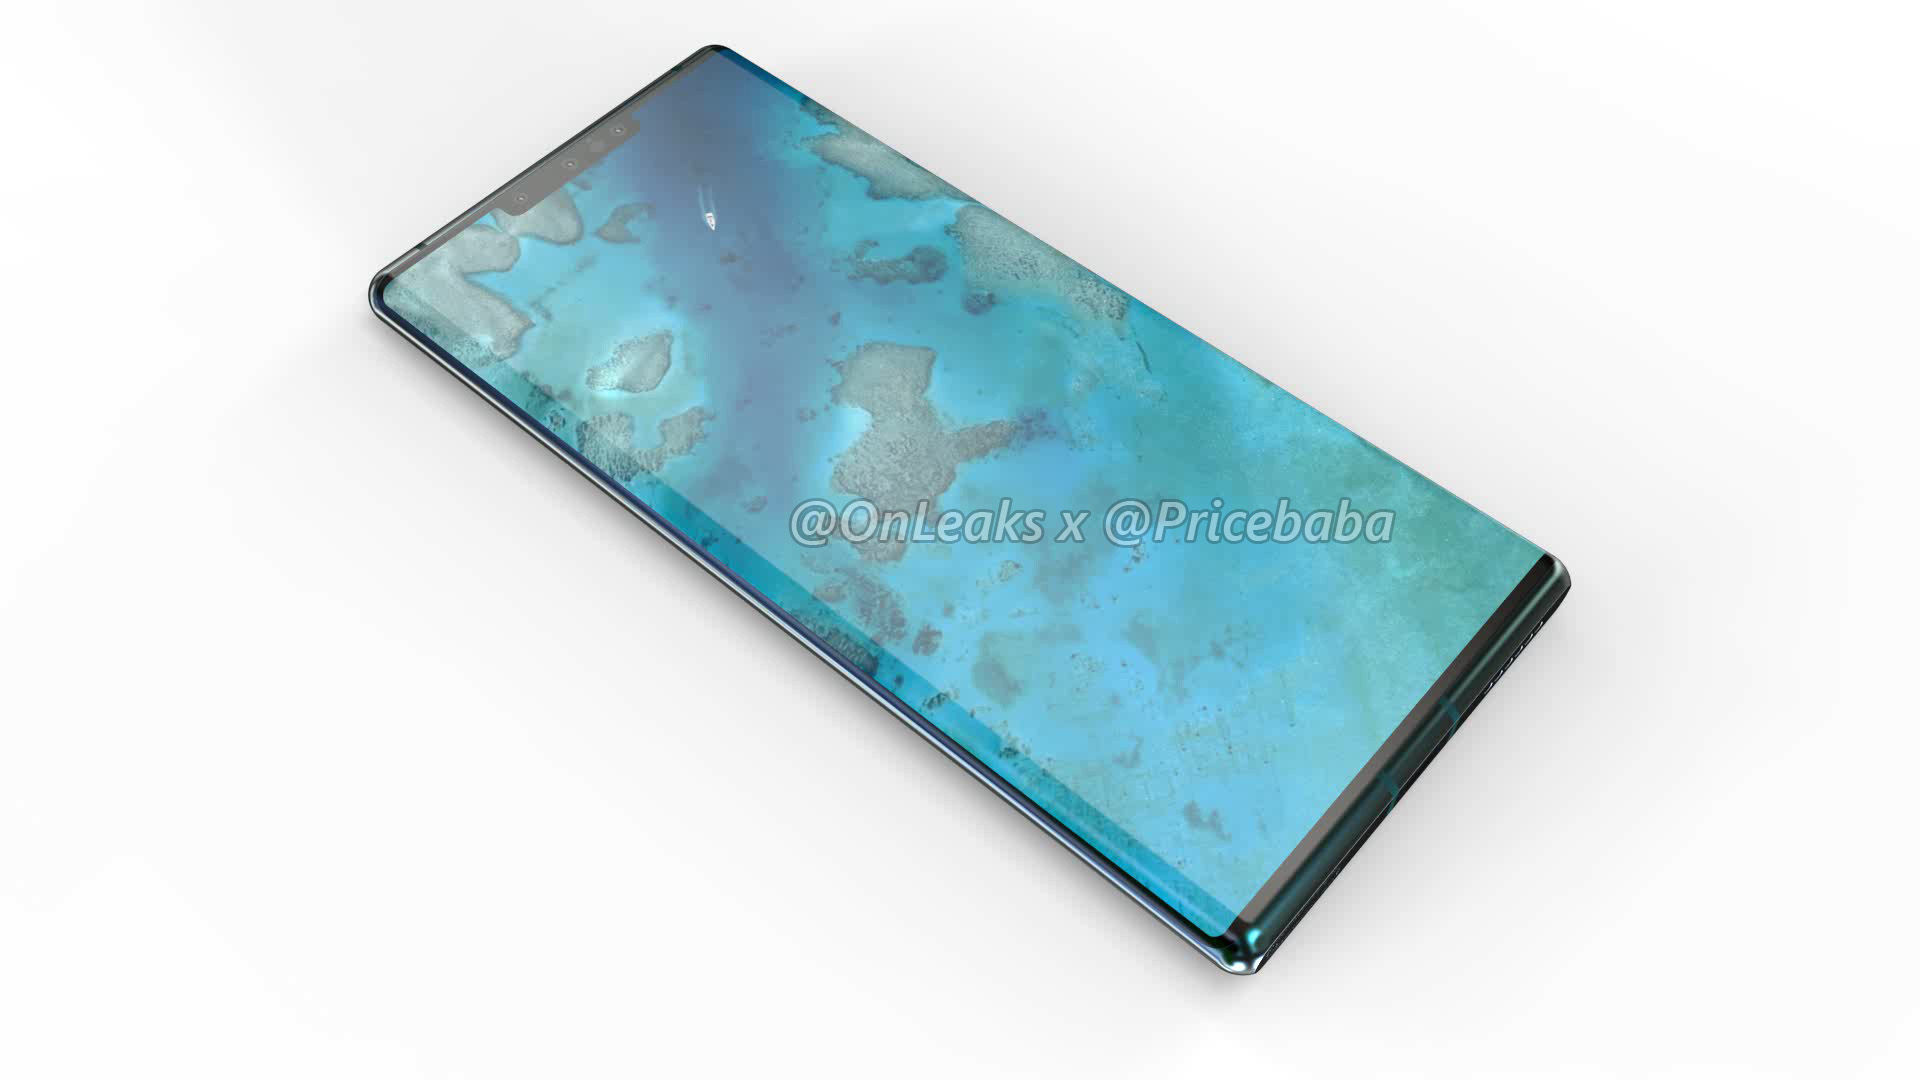 The front of the Huawei Mate 30 Pro.